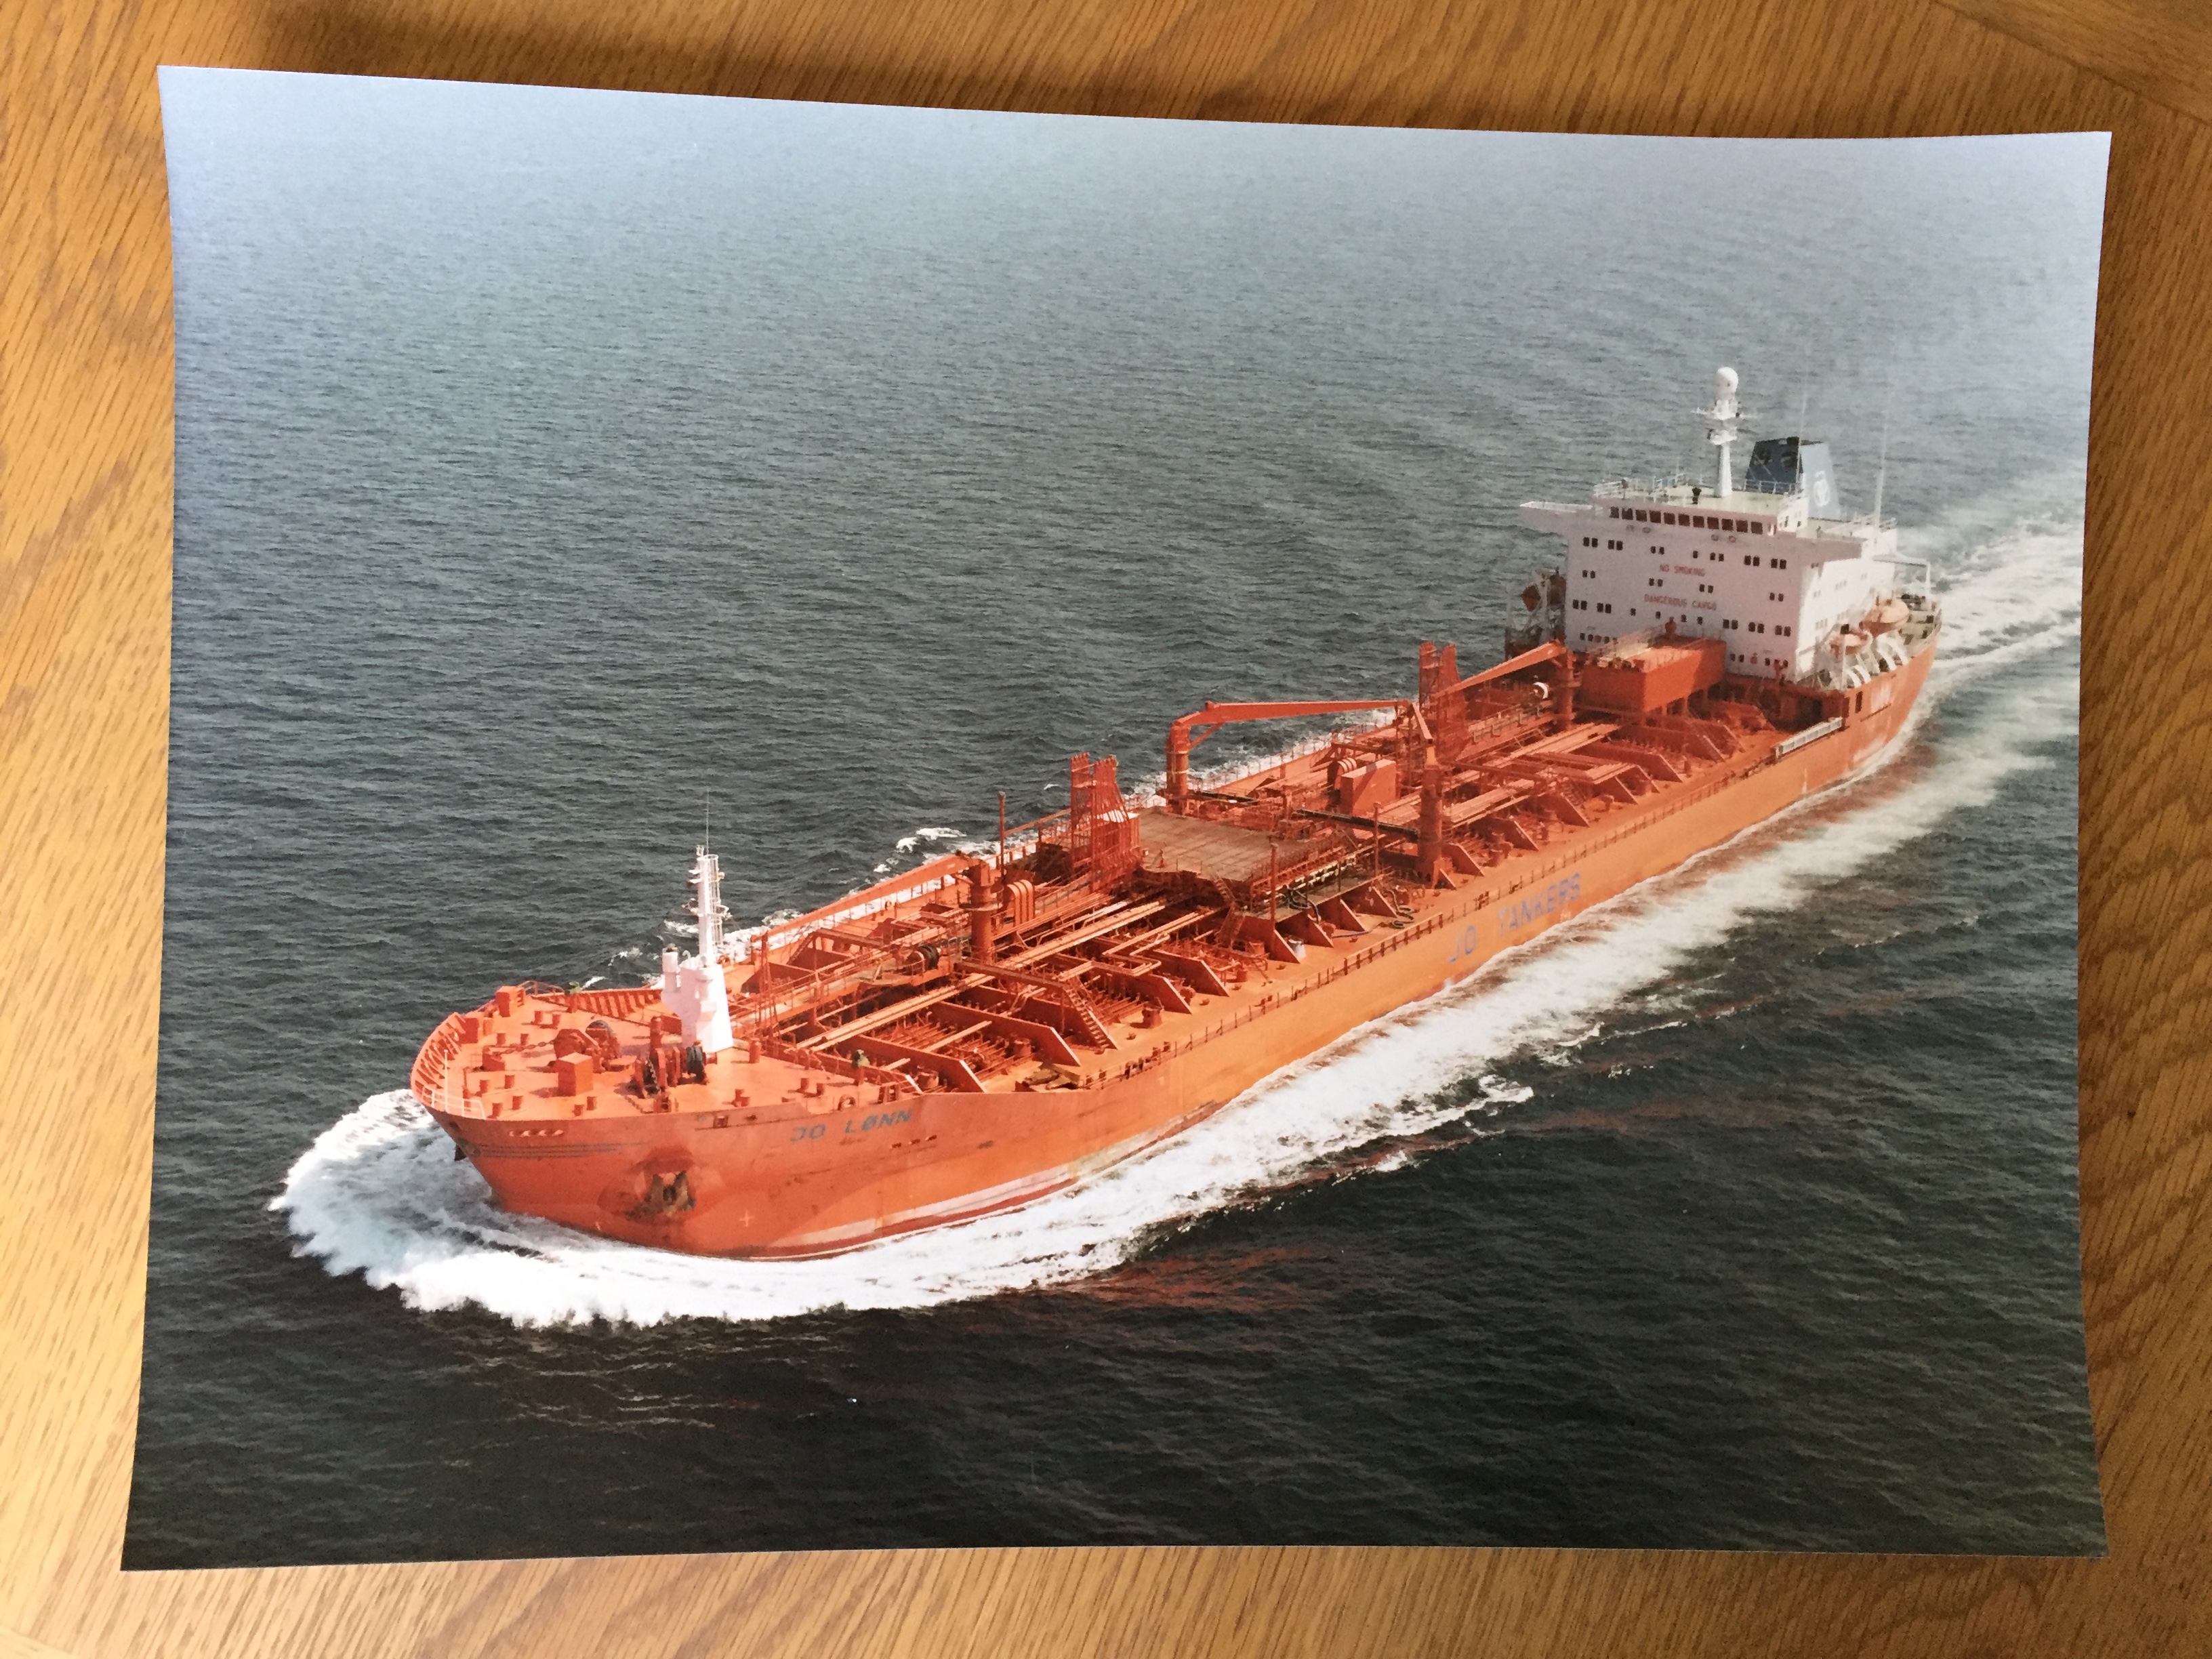 LARGE SIZE COLOUR PHOTOGRAPH OF THE CONTAINER VESSEL JO LONN FROM JO TANKERS